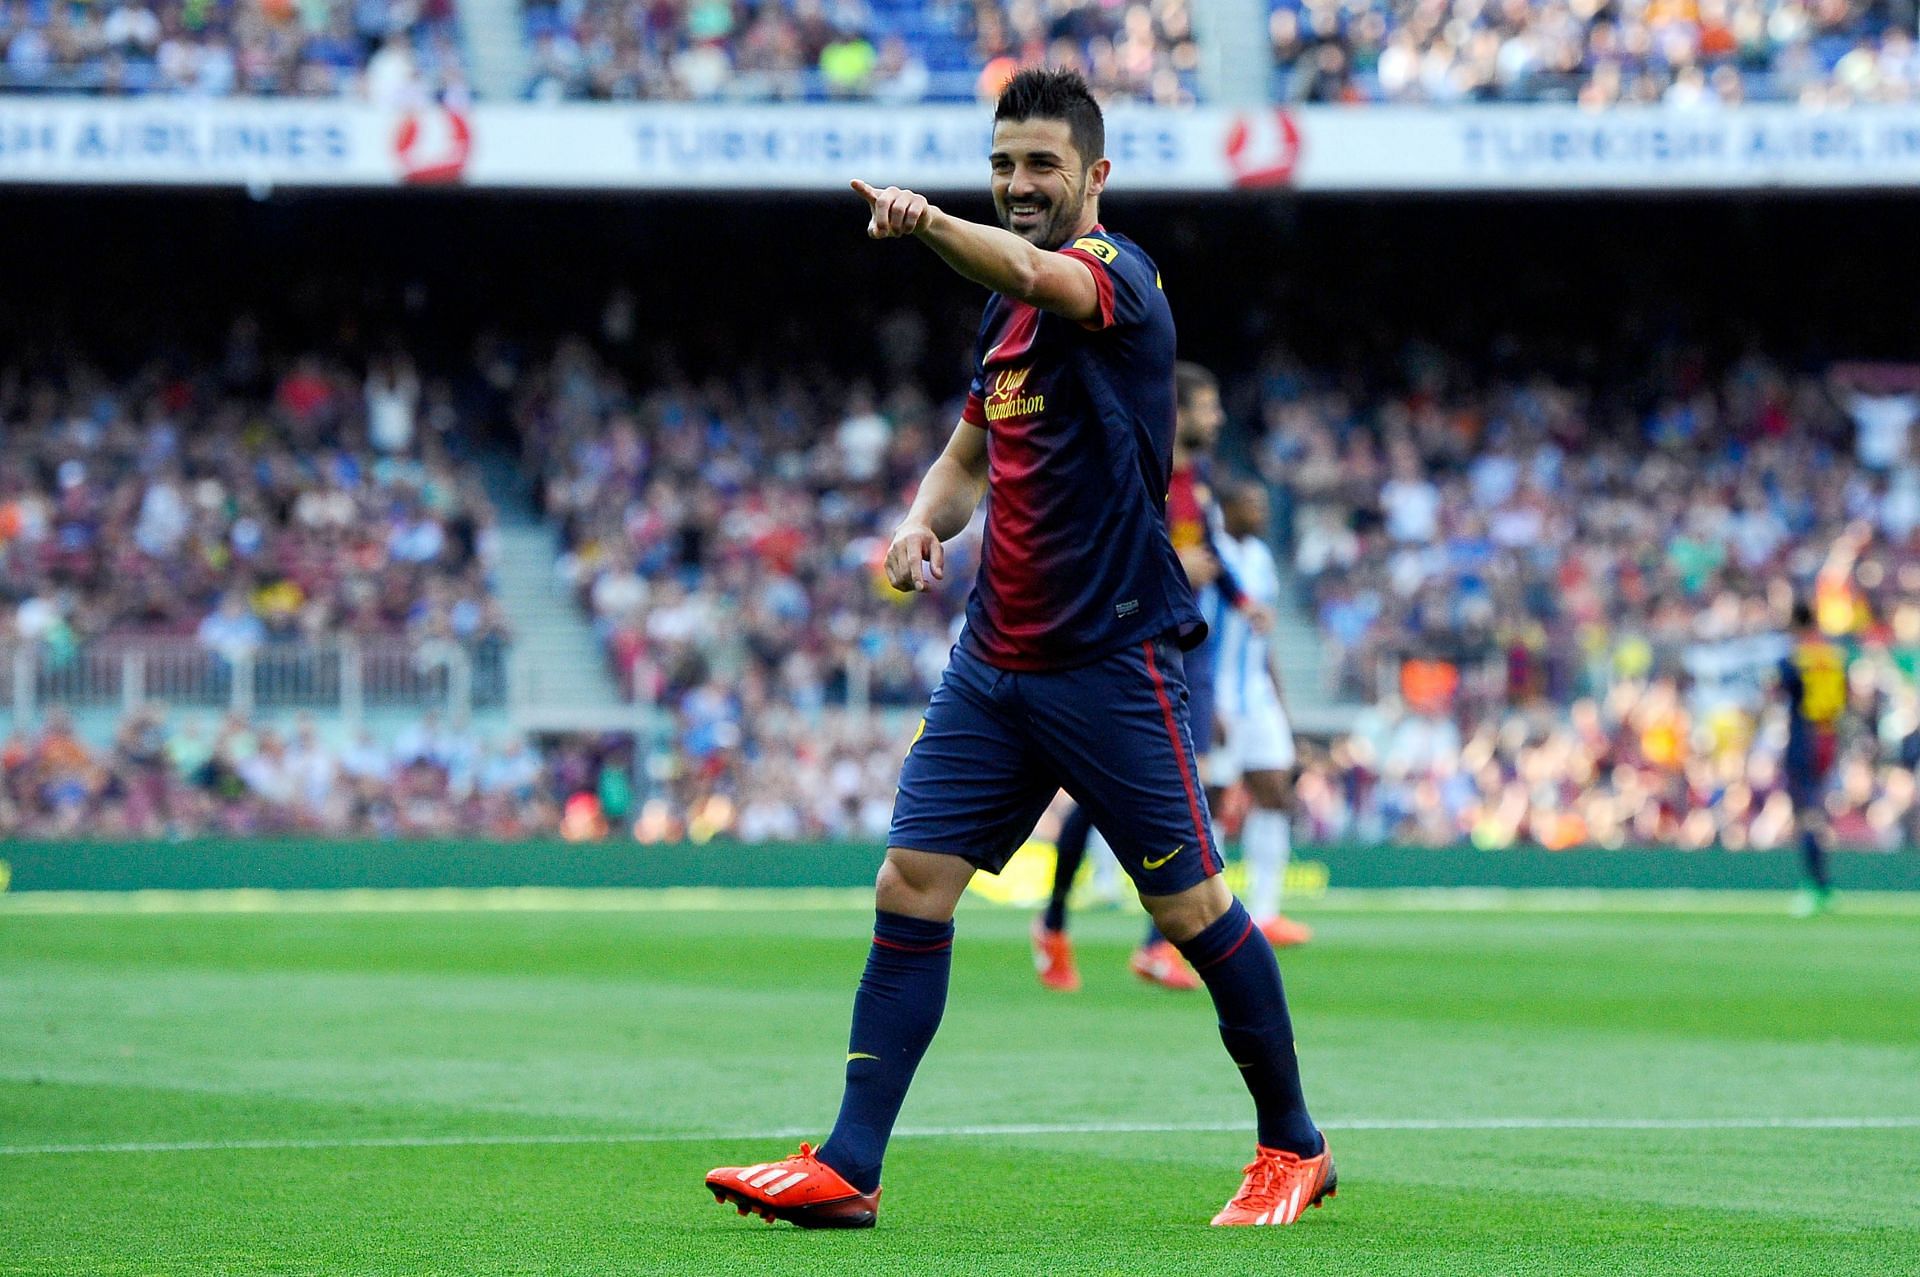 David Villa has thrived in both the domestic and international spheres of Spanish football